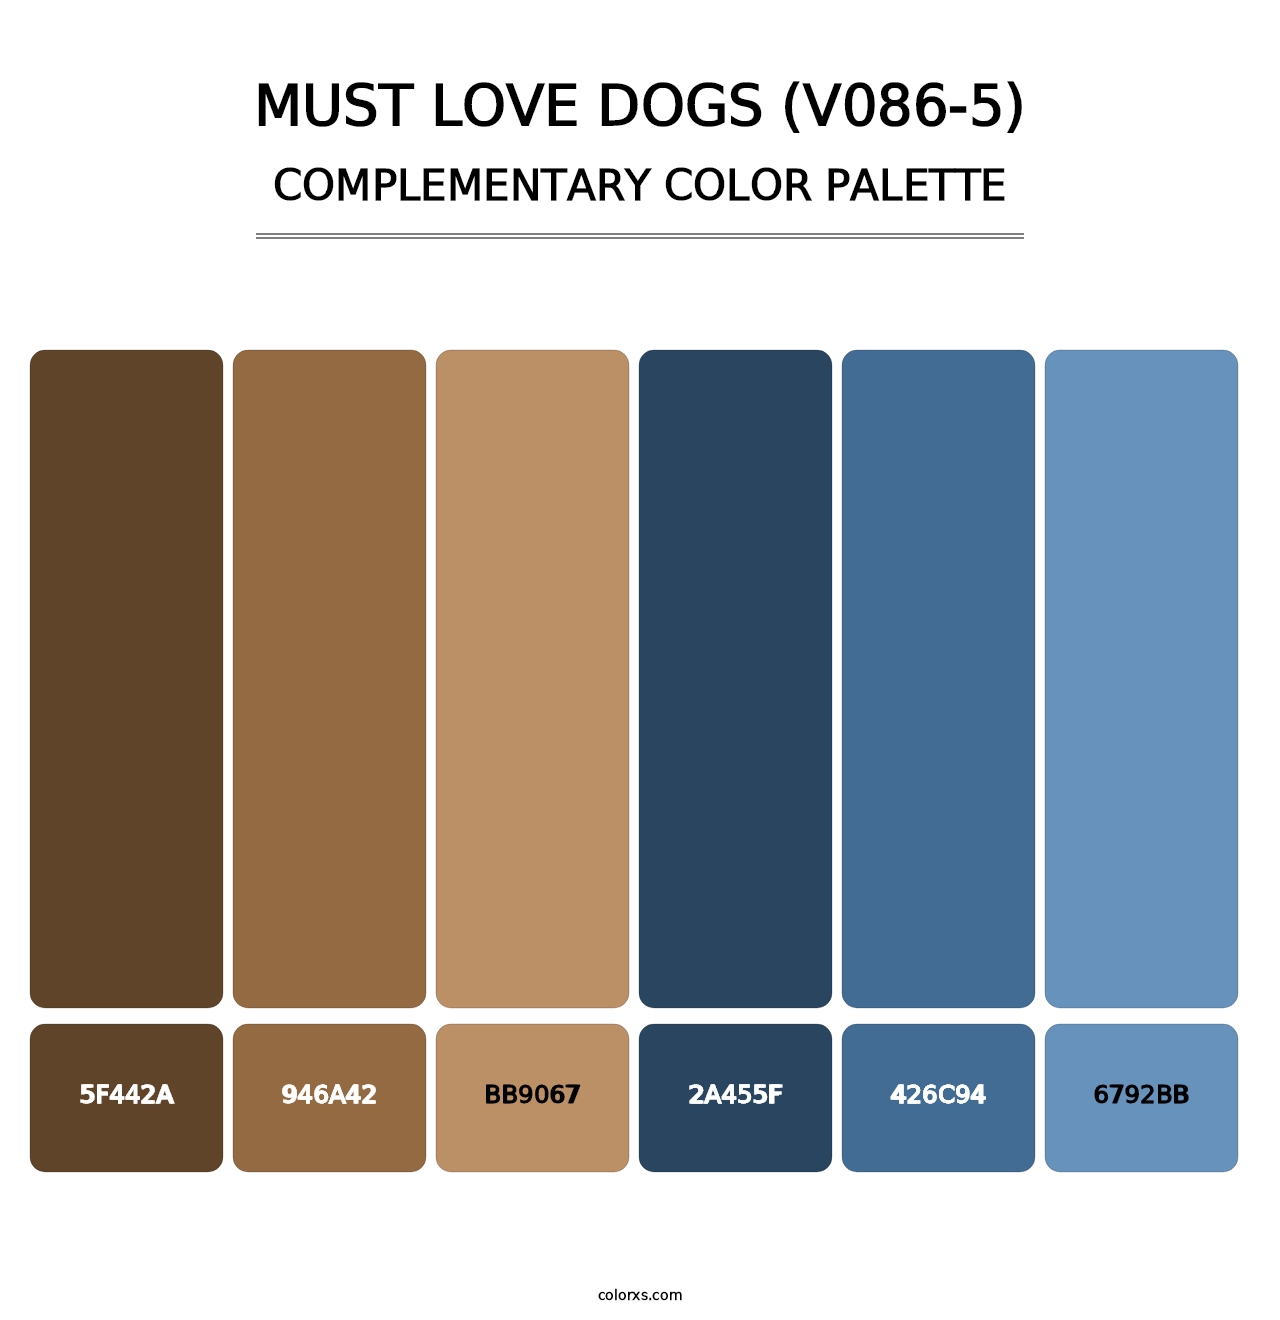 Must Love Dogs (V086-5) - Complementary Color Palette